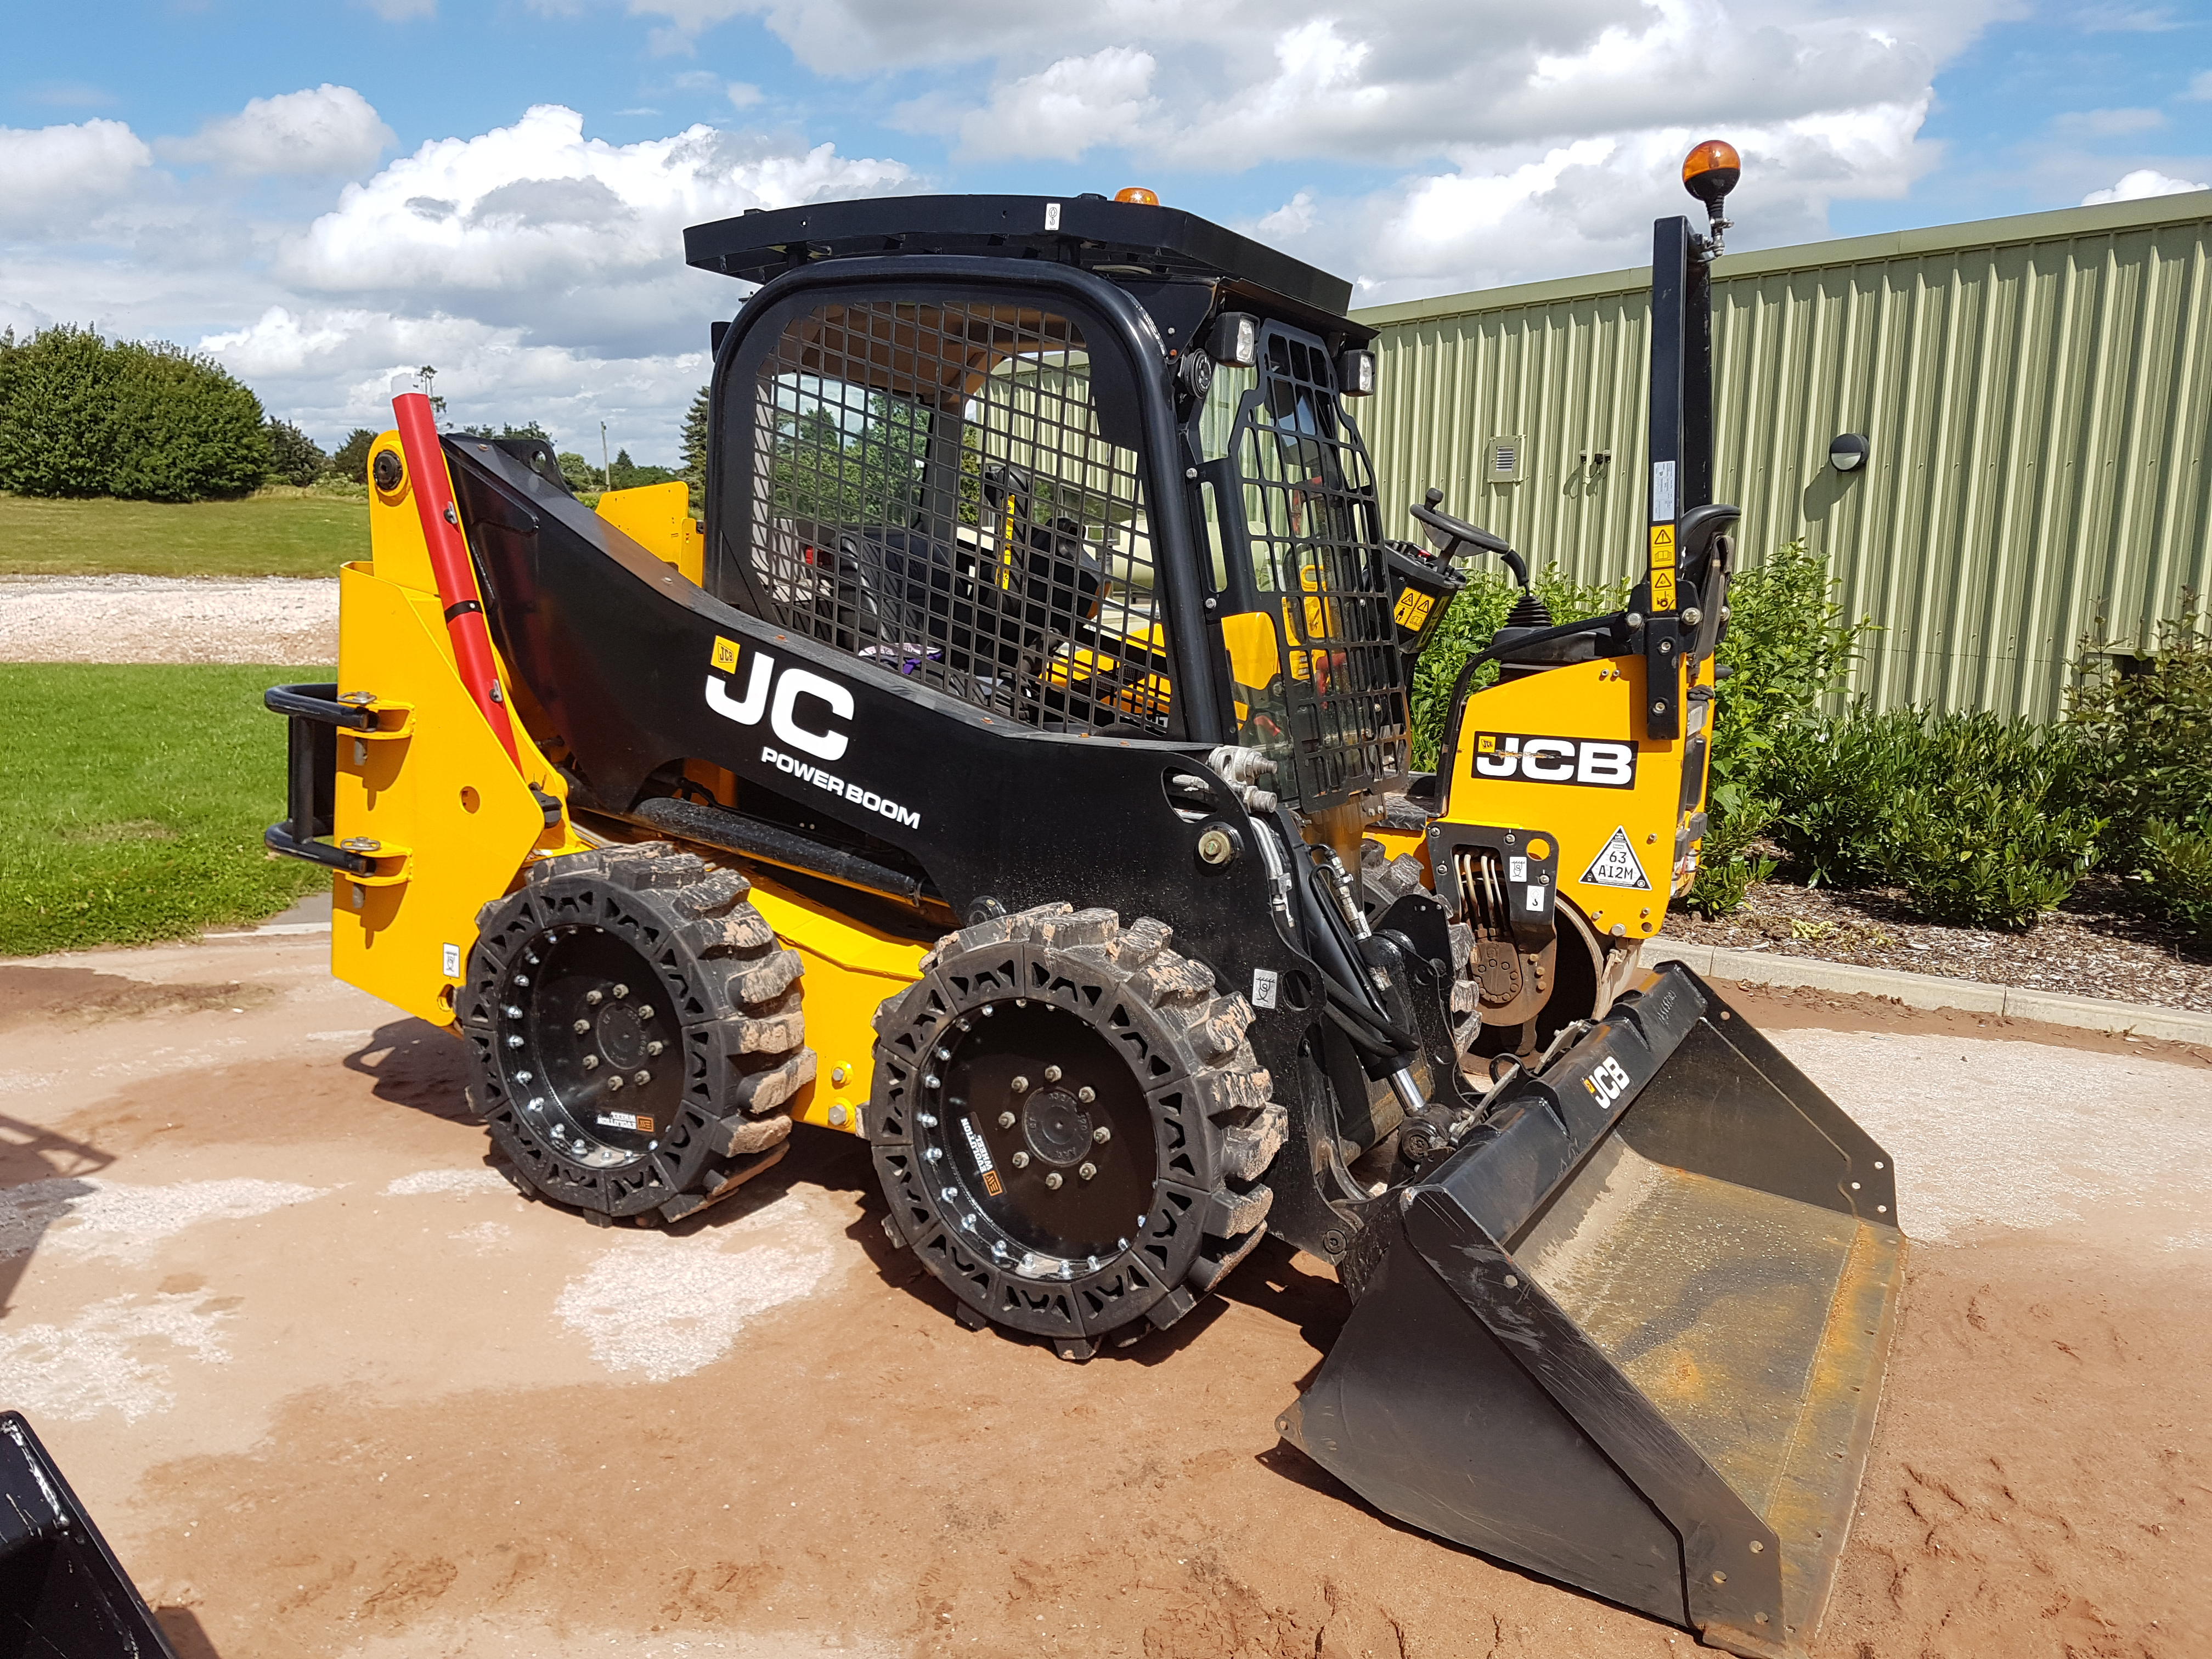 This images shows a yellow JCB Skid Steer using our 10x16.5 Solid Skid Steer Tires